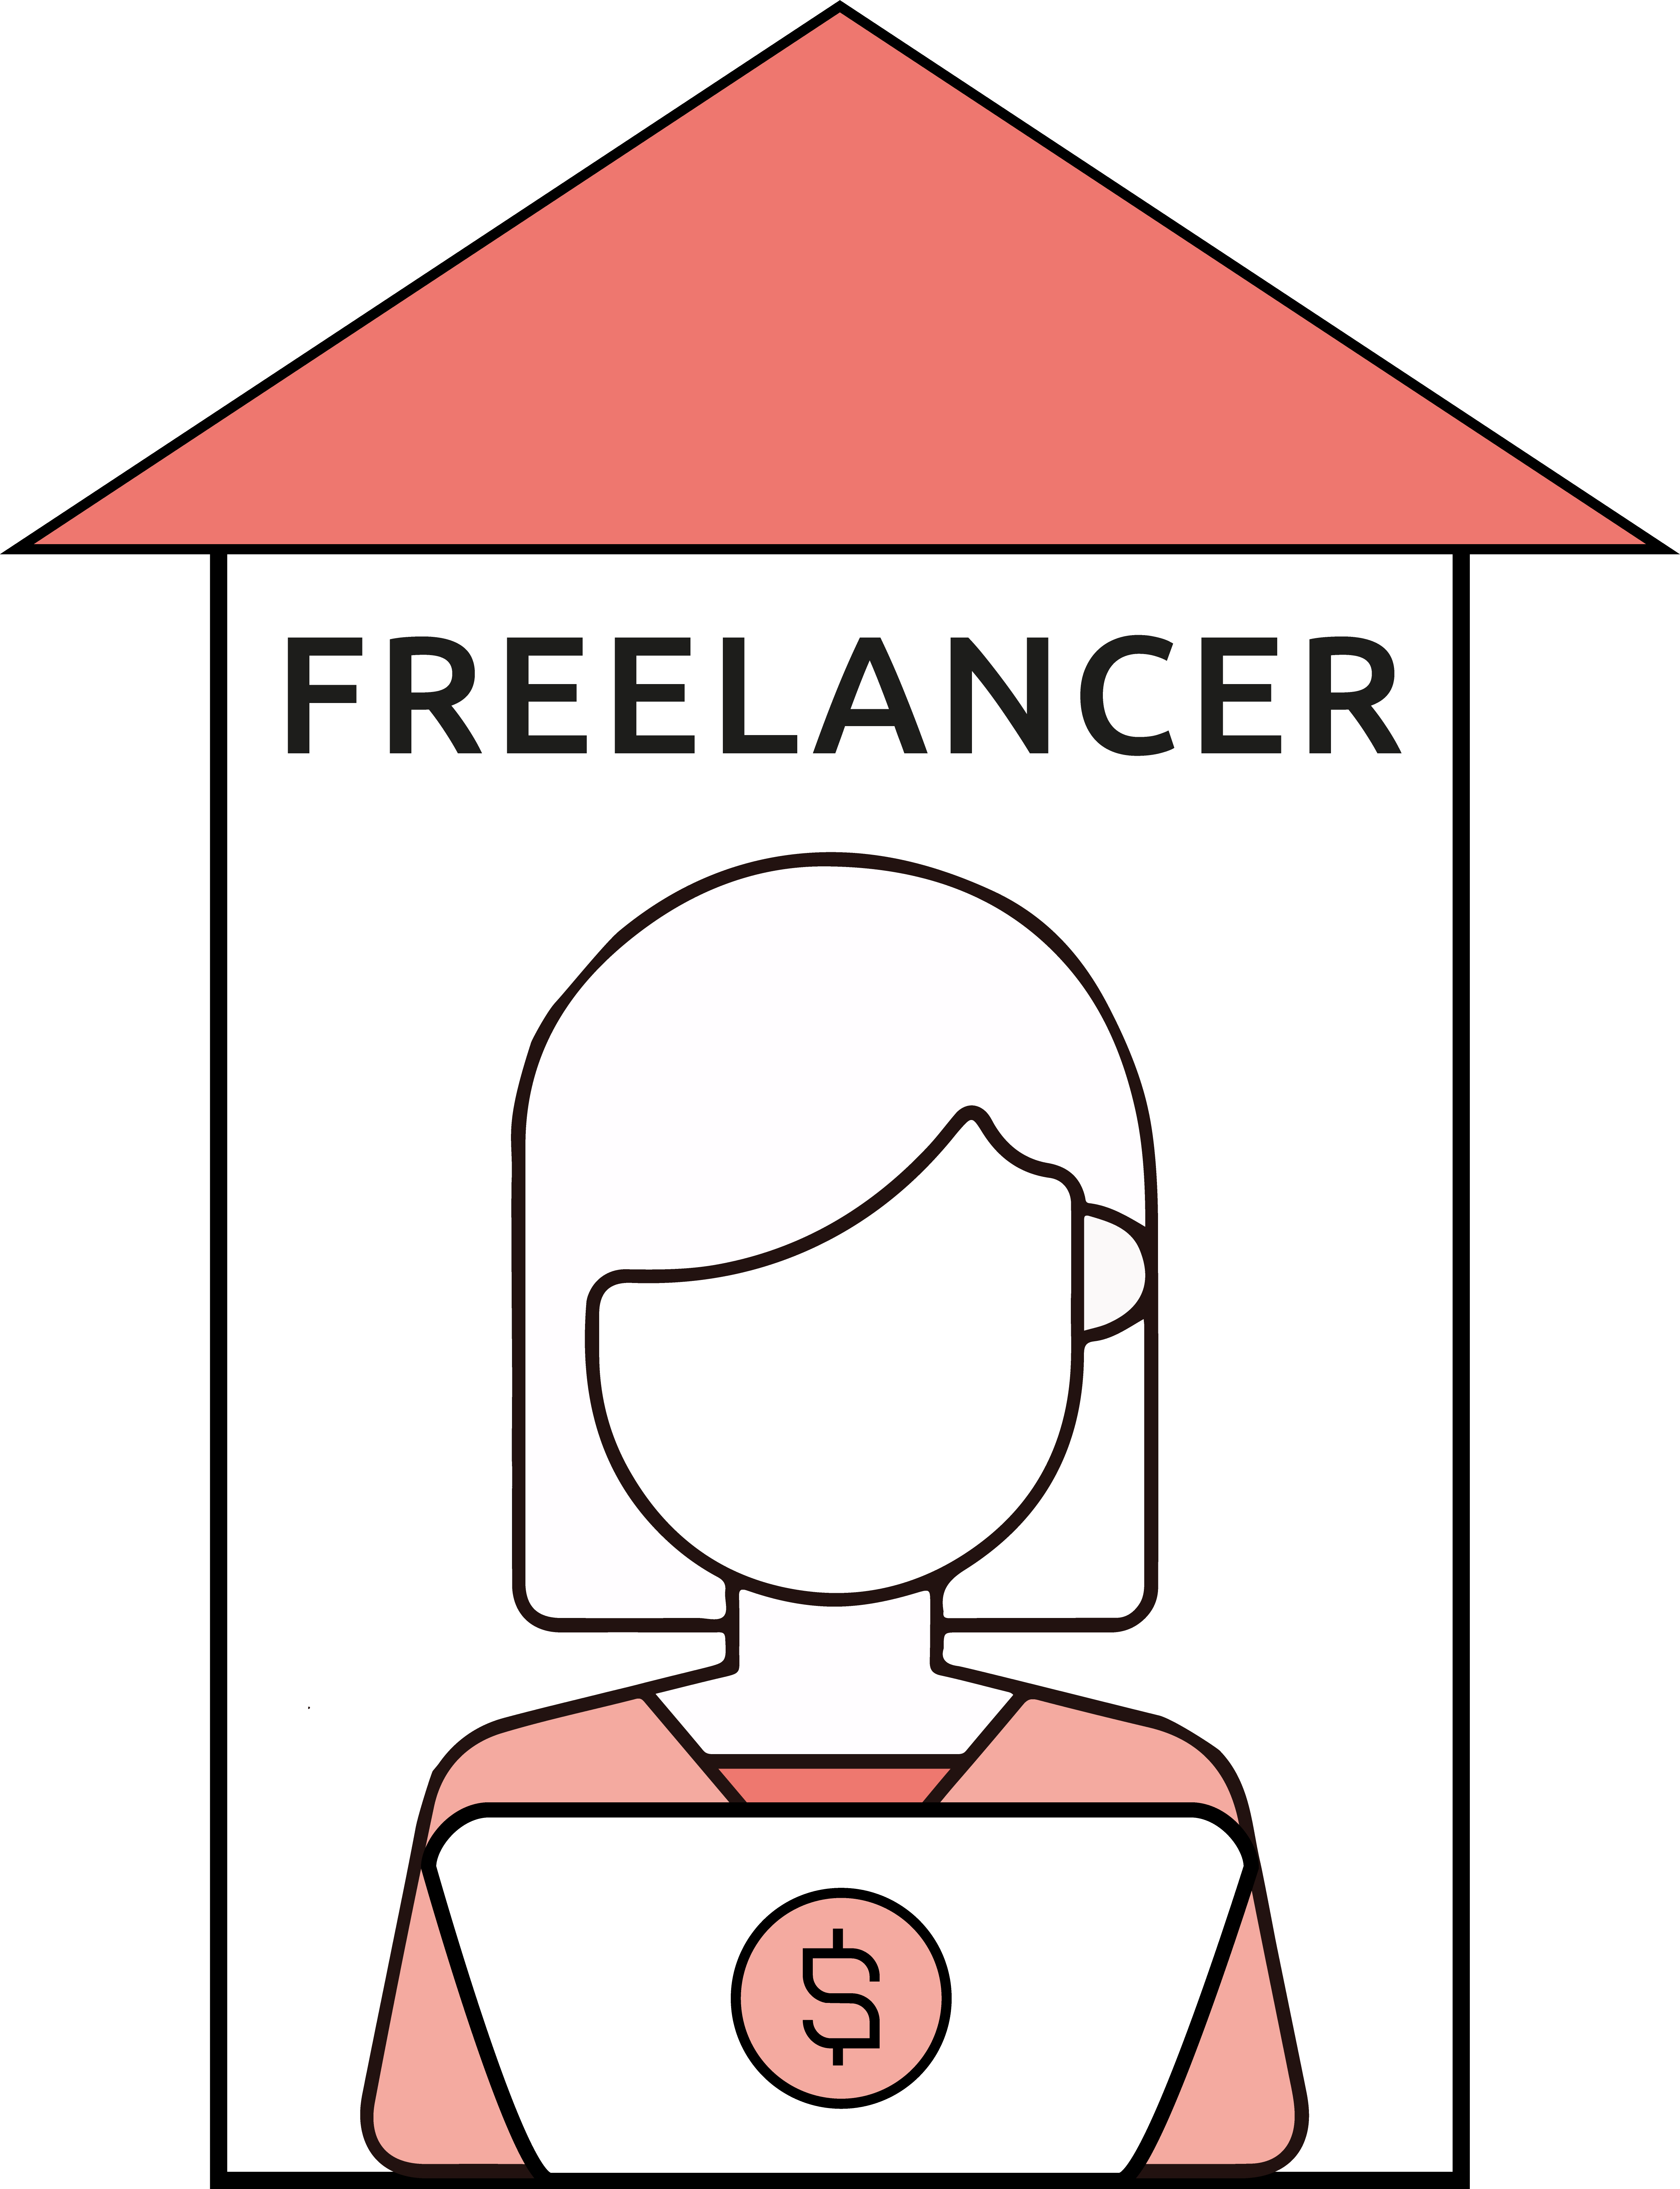 What is the difference between freelancer, self-employed and employee?